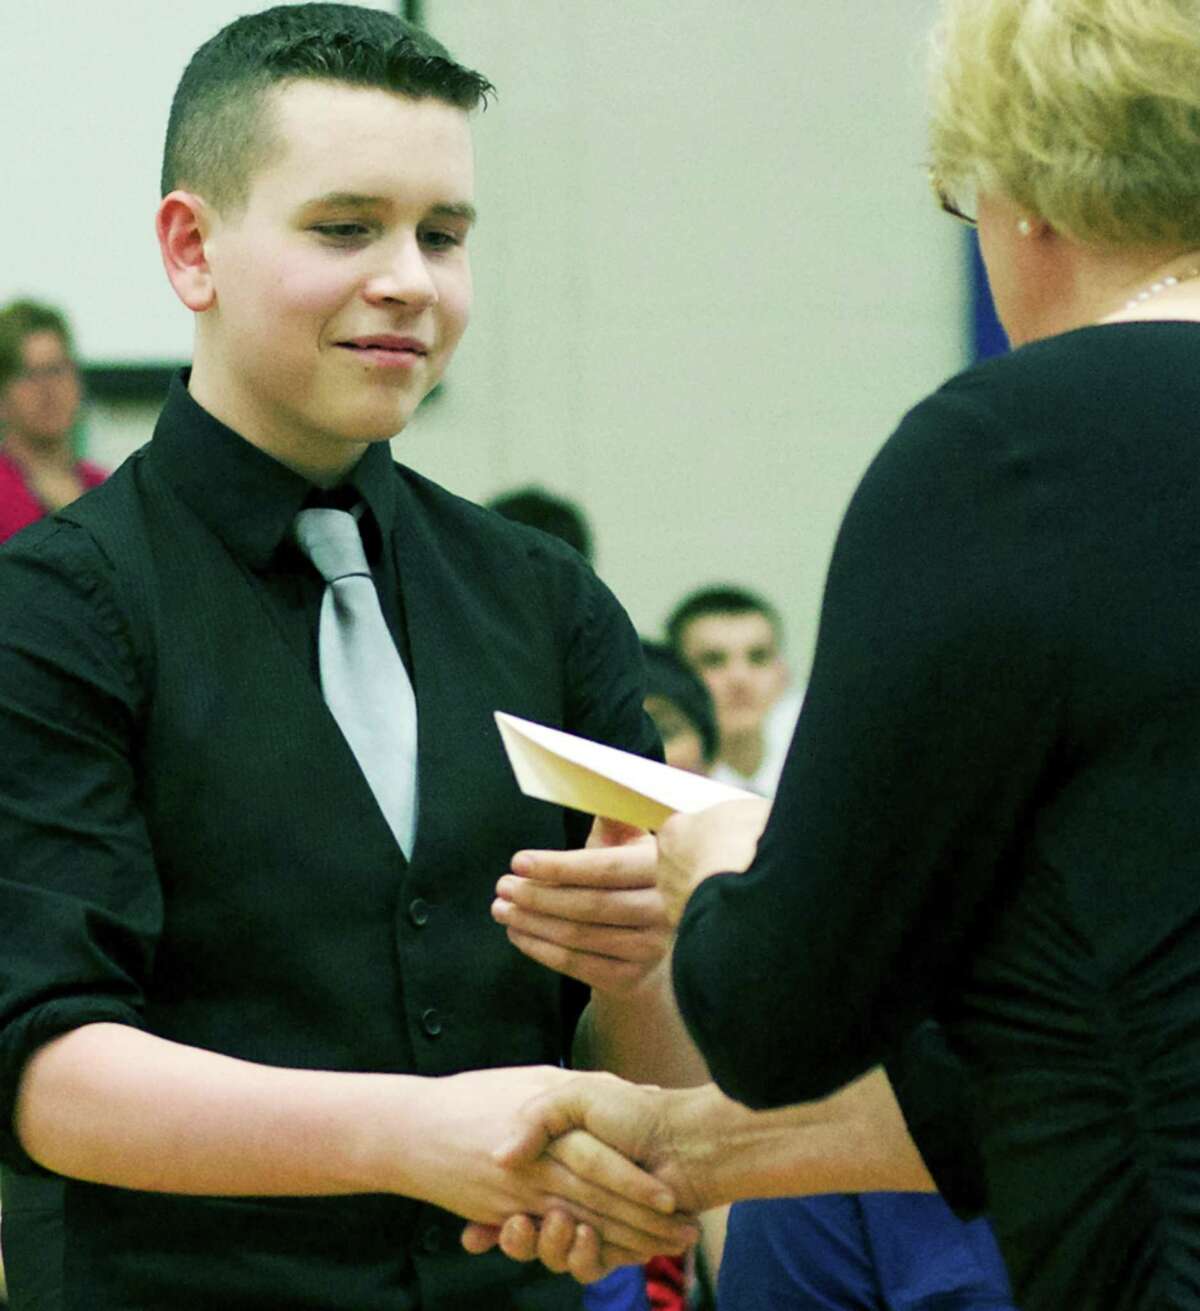 Dominic Adams receives his certificate of promotion from Principal Dana Ford during the White team's promotion ceremony June 16, 2014 at Schaghticoke Middle School in New Milford.